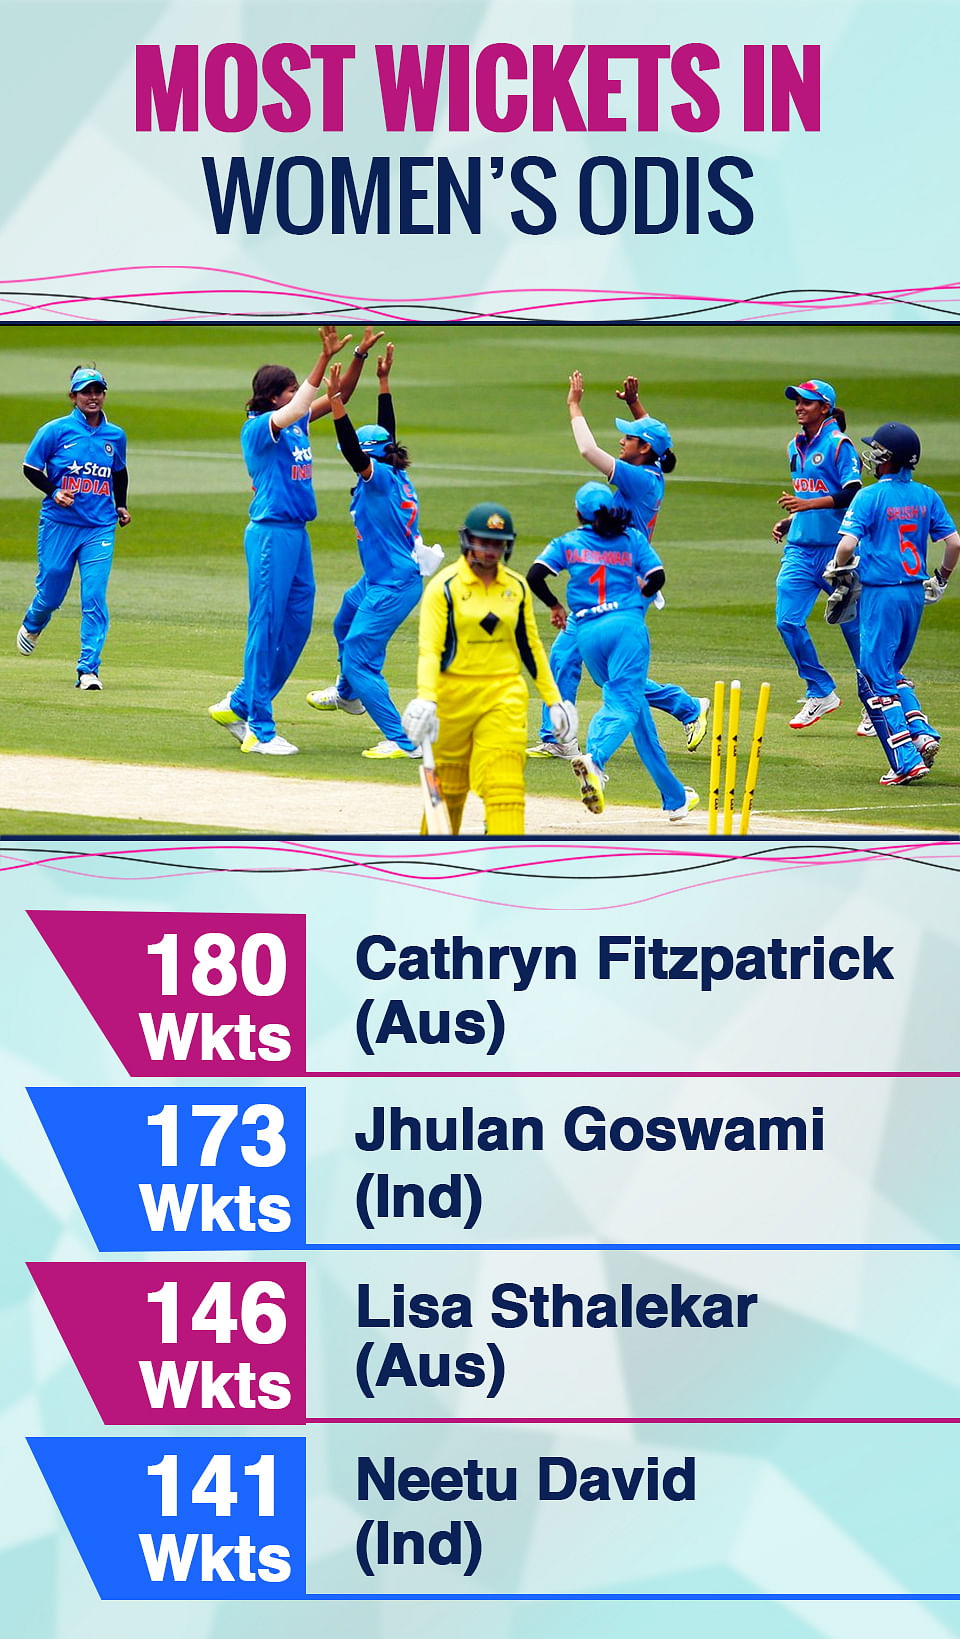 Stats expert Arun Gopalakrishnan takes a look at some of the brighter stars in the team ahead of the series vs Aus